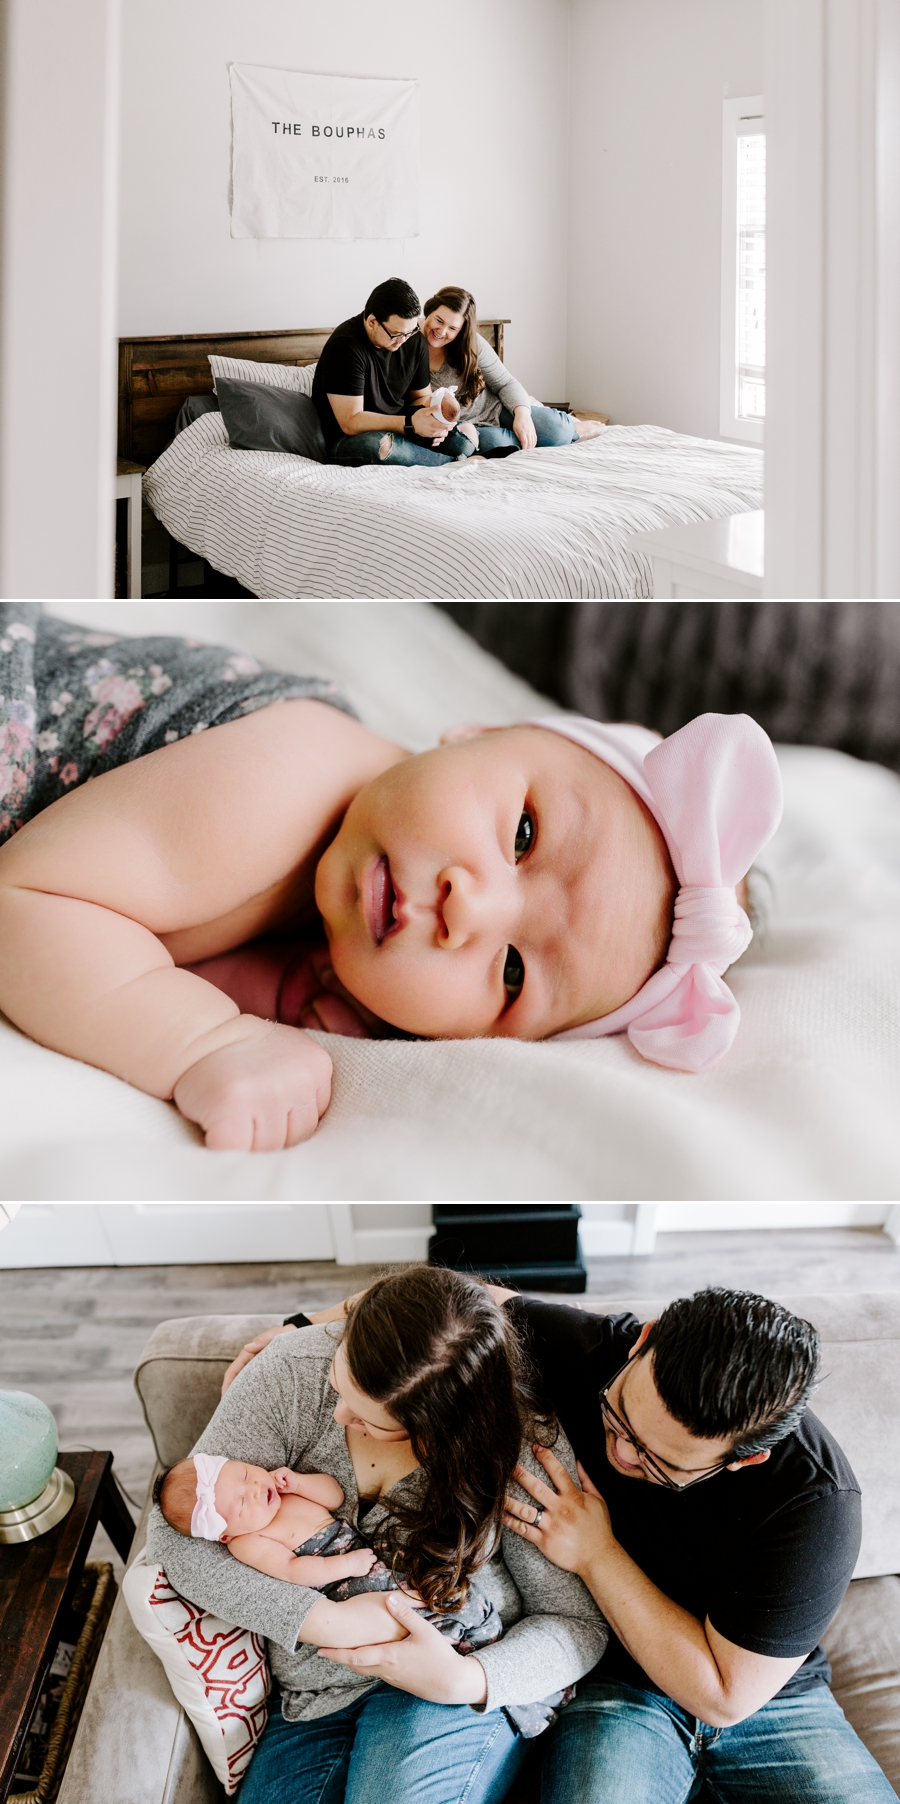 Newborn in home family session | loversoflove.com